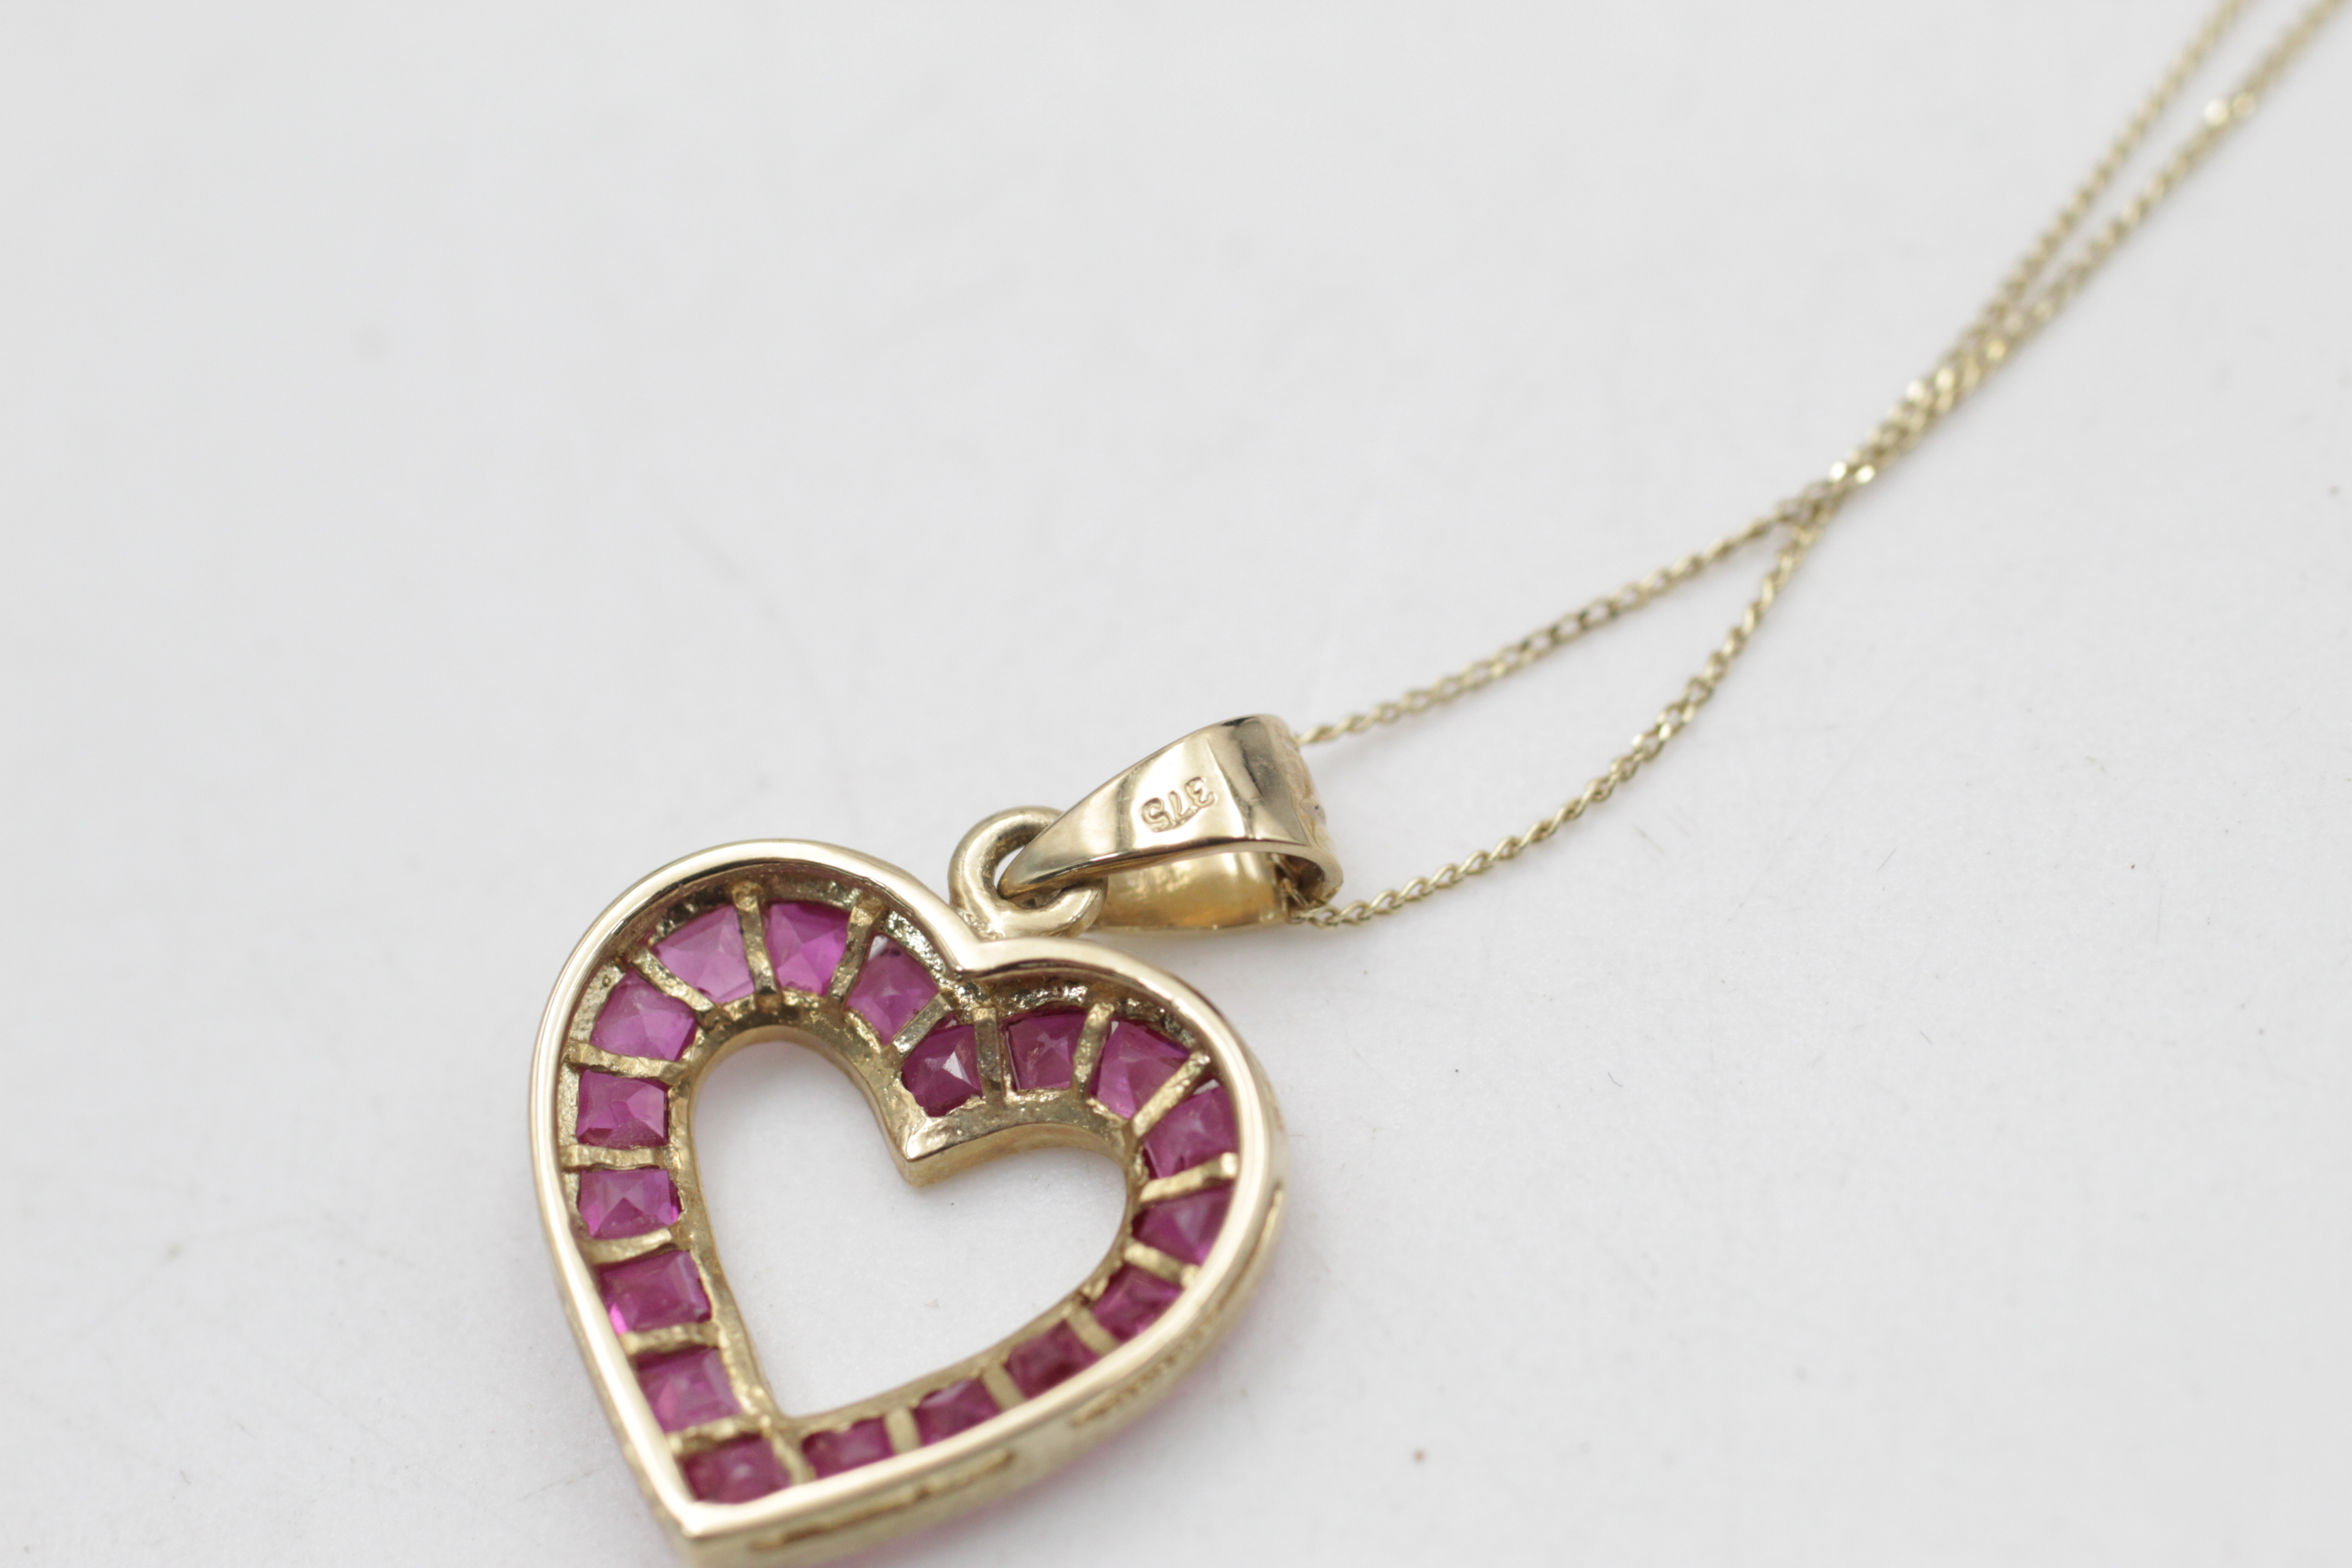 9ct gold ruby channel set open heart pendant necklace (2.1g) - Image 5 of 6